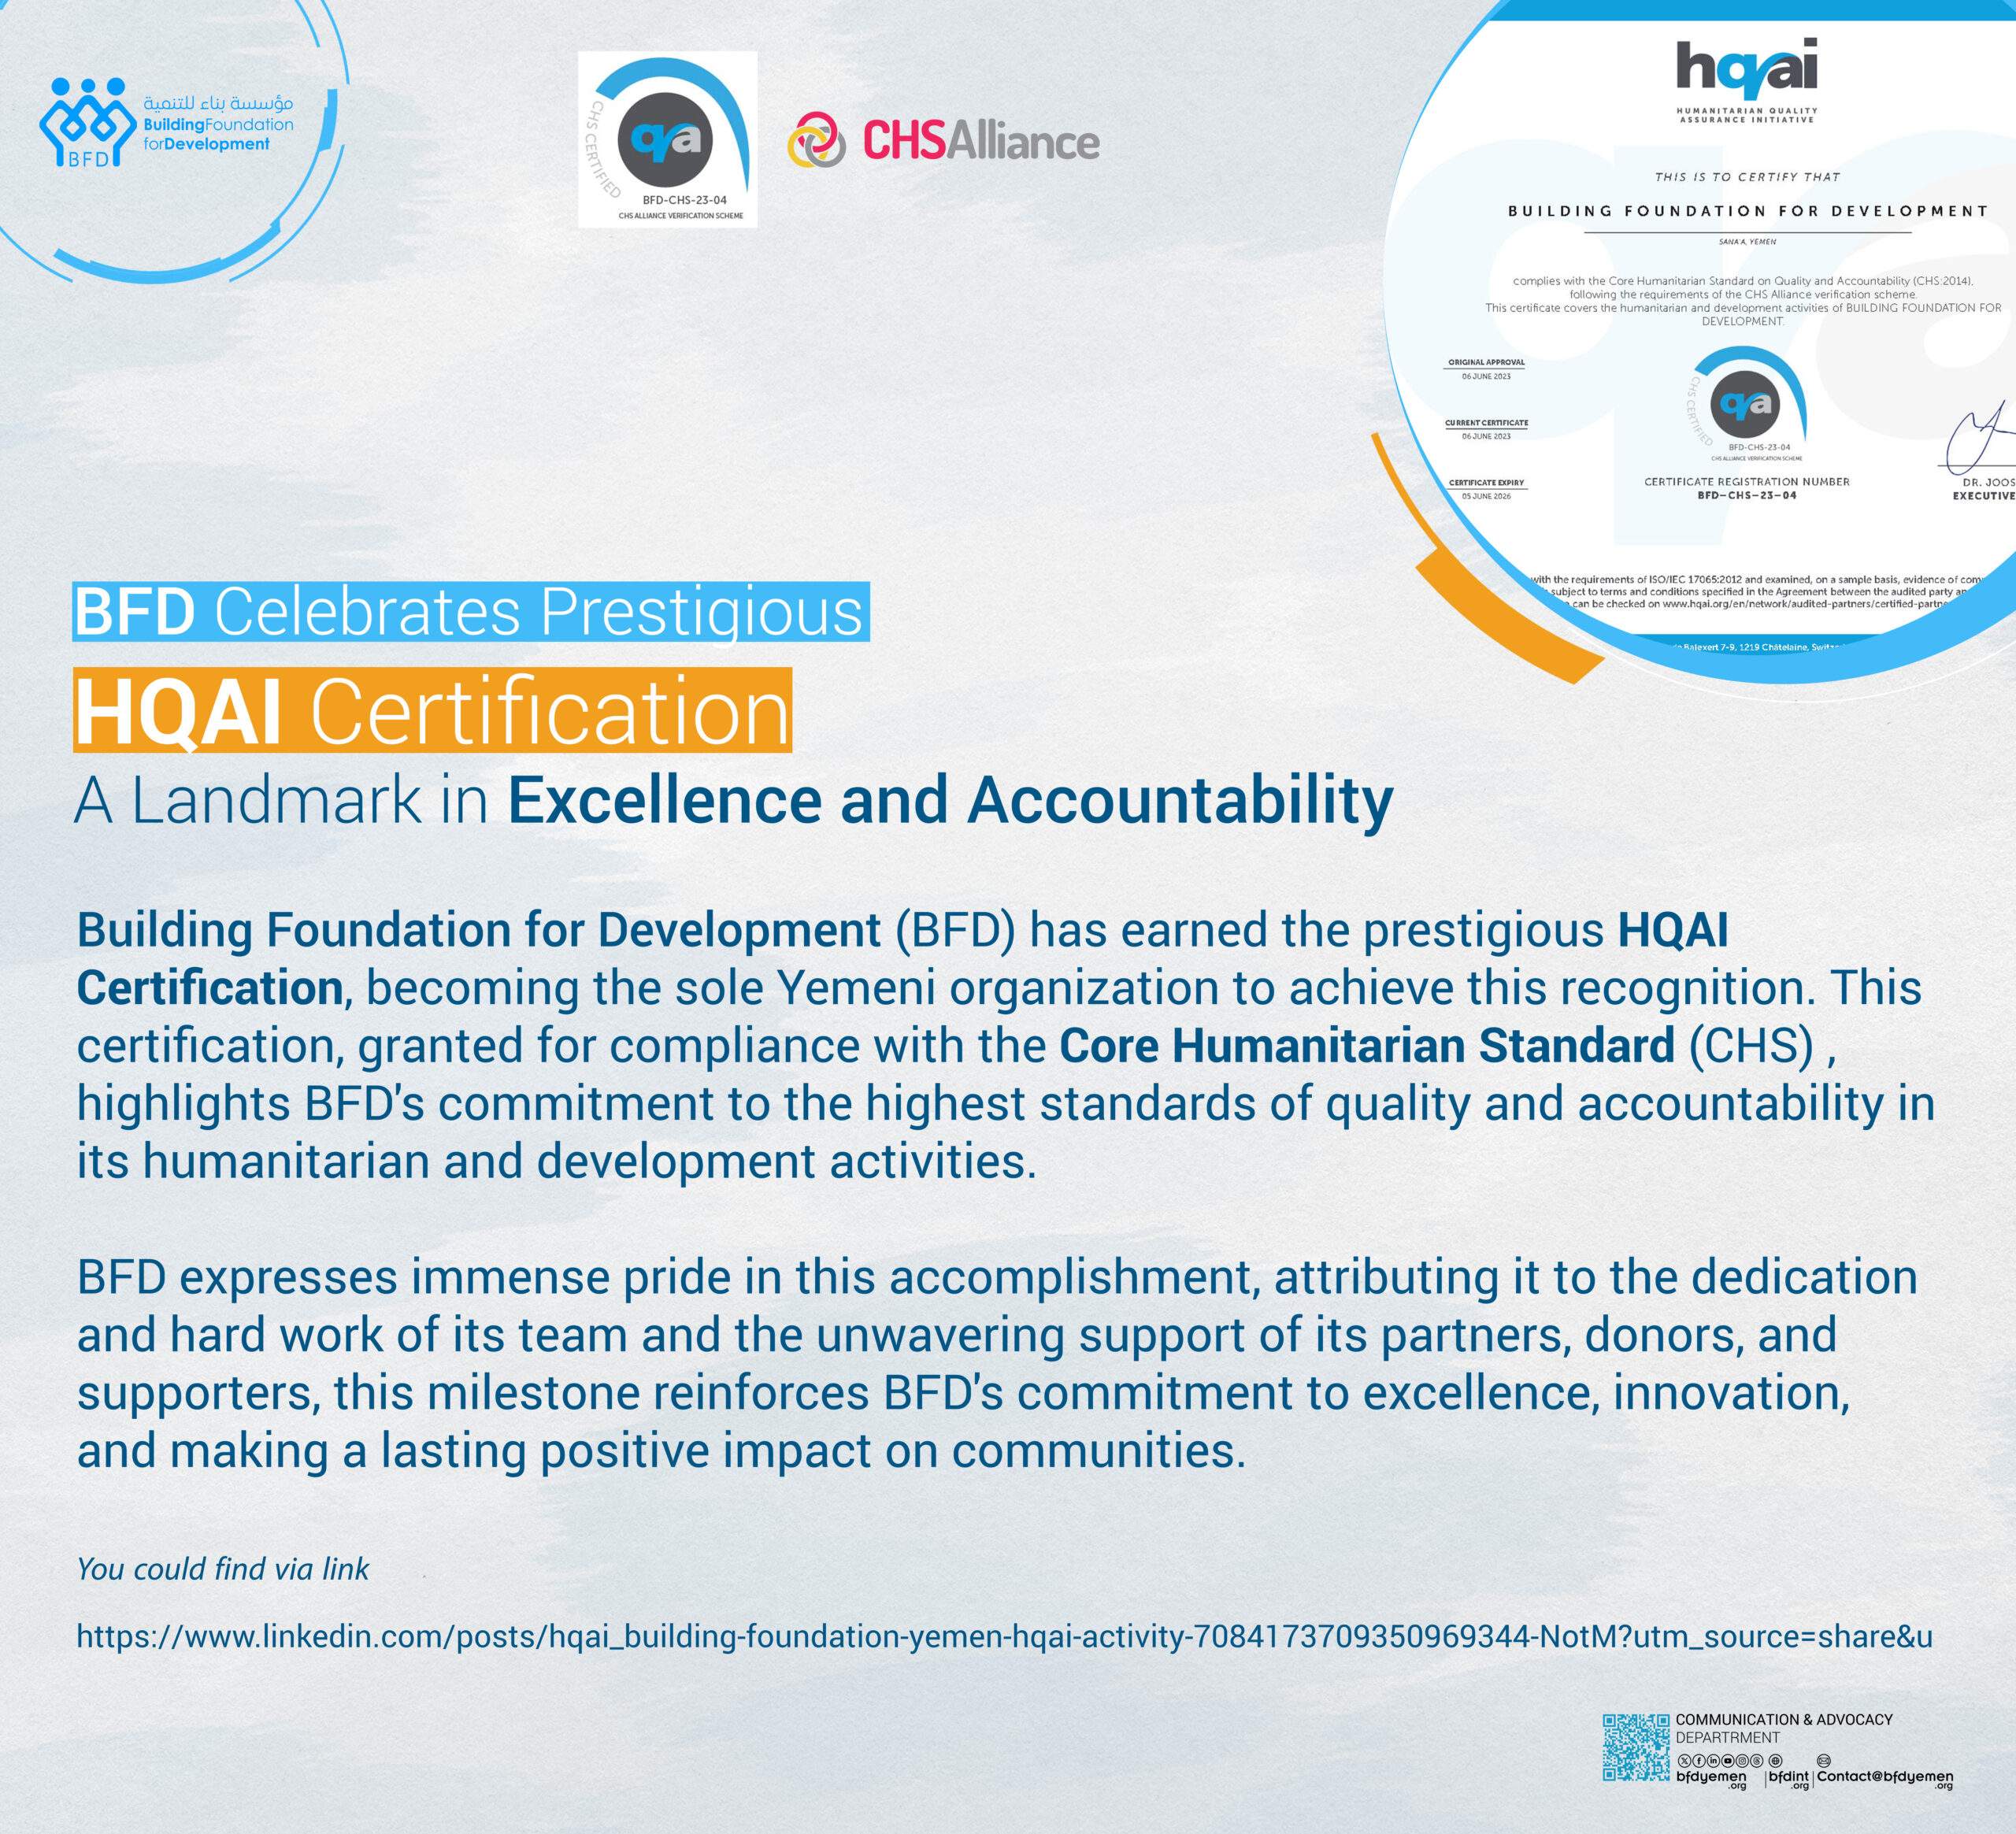 BFD Celebrates Prestigious HQAI Certification: A Landmark in Excellence and Accountability